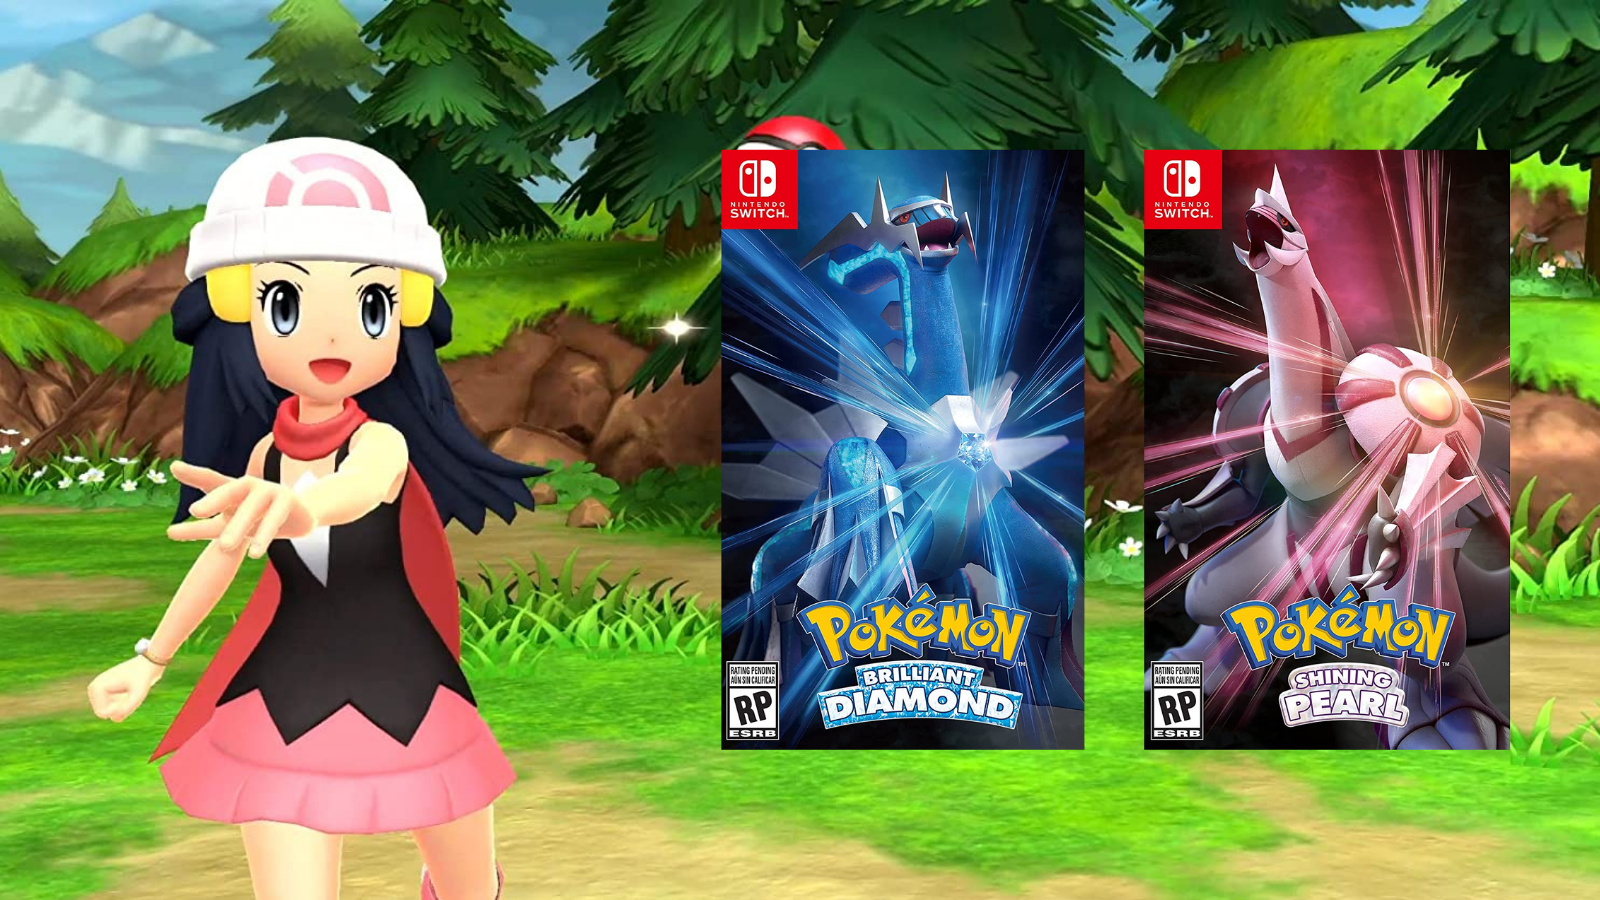 US: Pre-orders of the Pokemon Brilliant Diamond & Shining Pearl Double Pack  from Best Buy will include an exclusive keychain - My Nintendo News